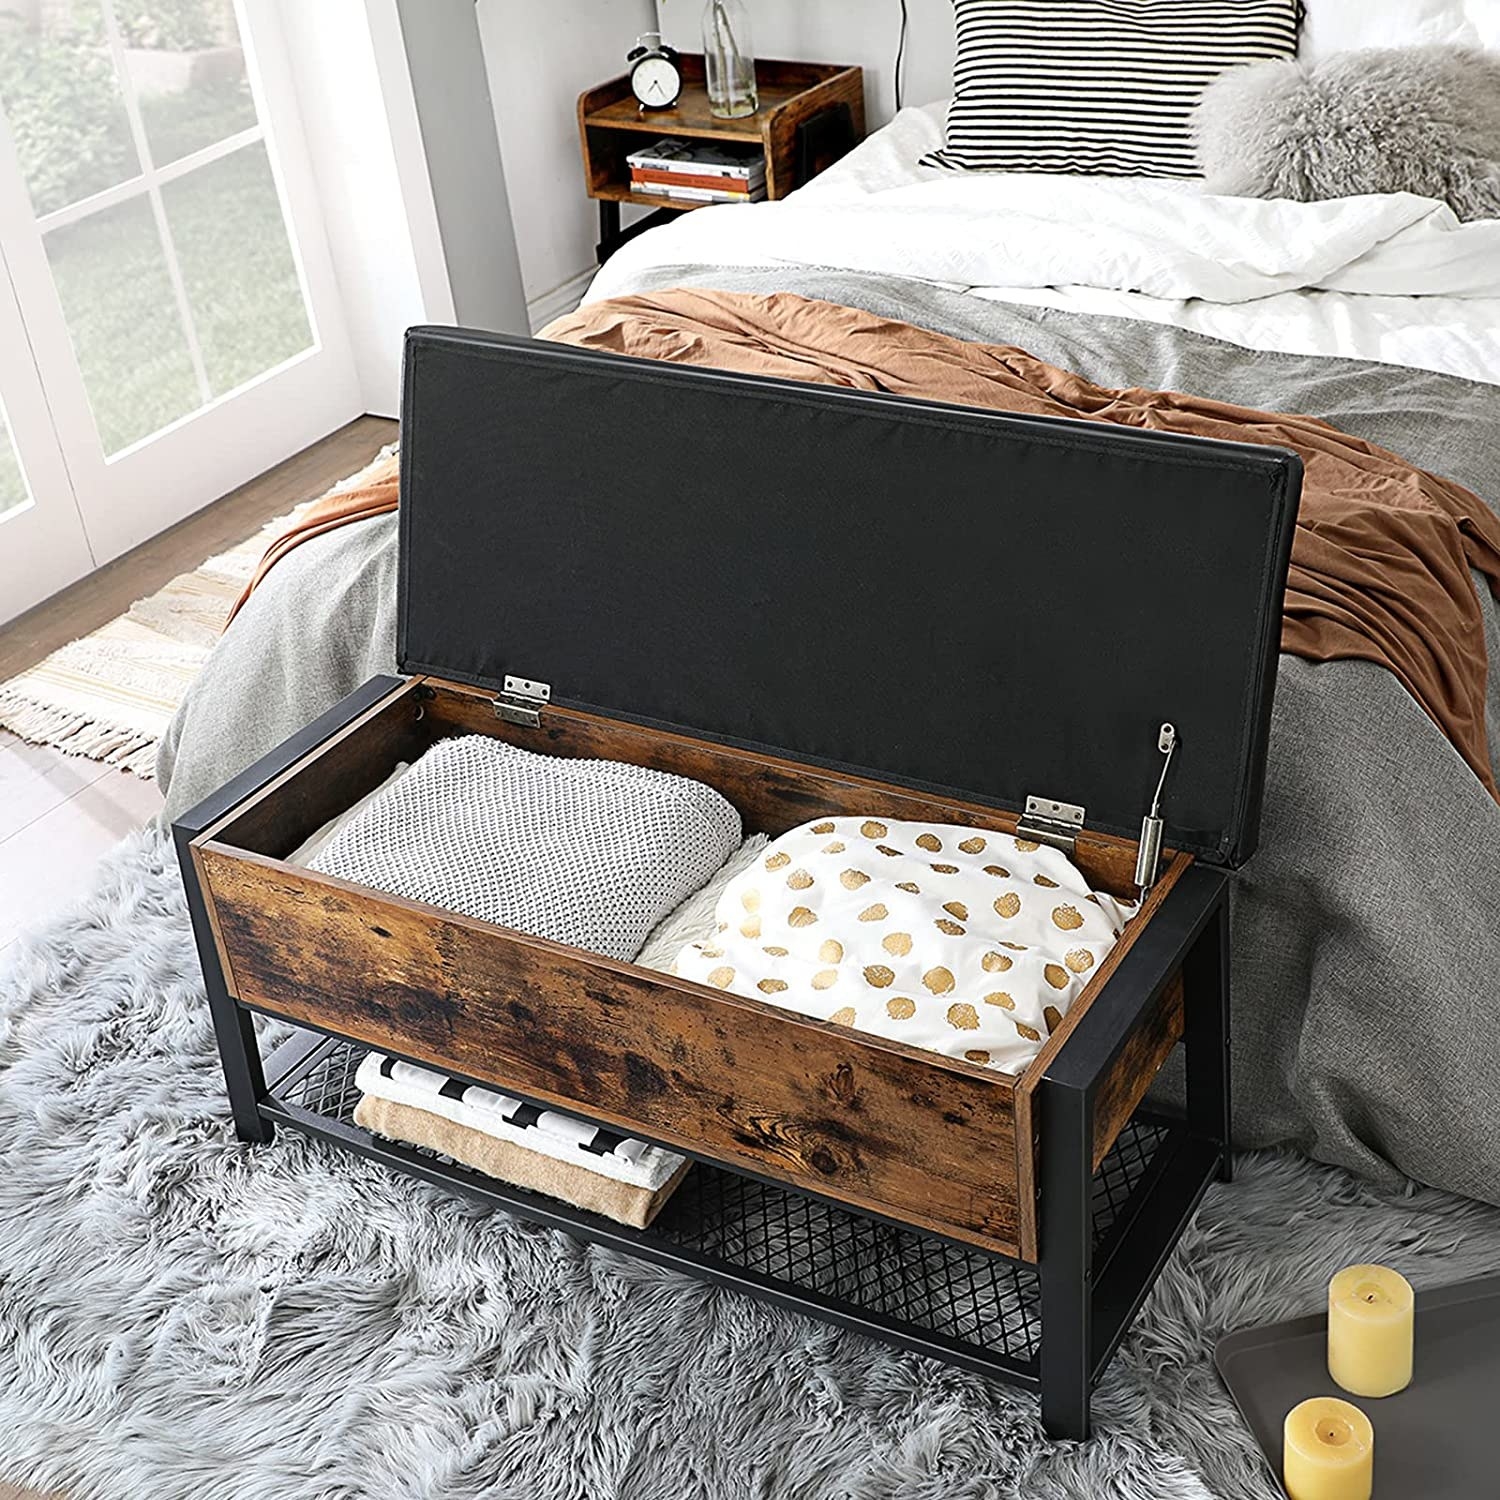 The storage chest with linens inside